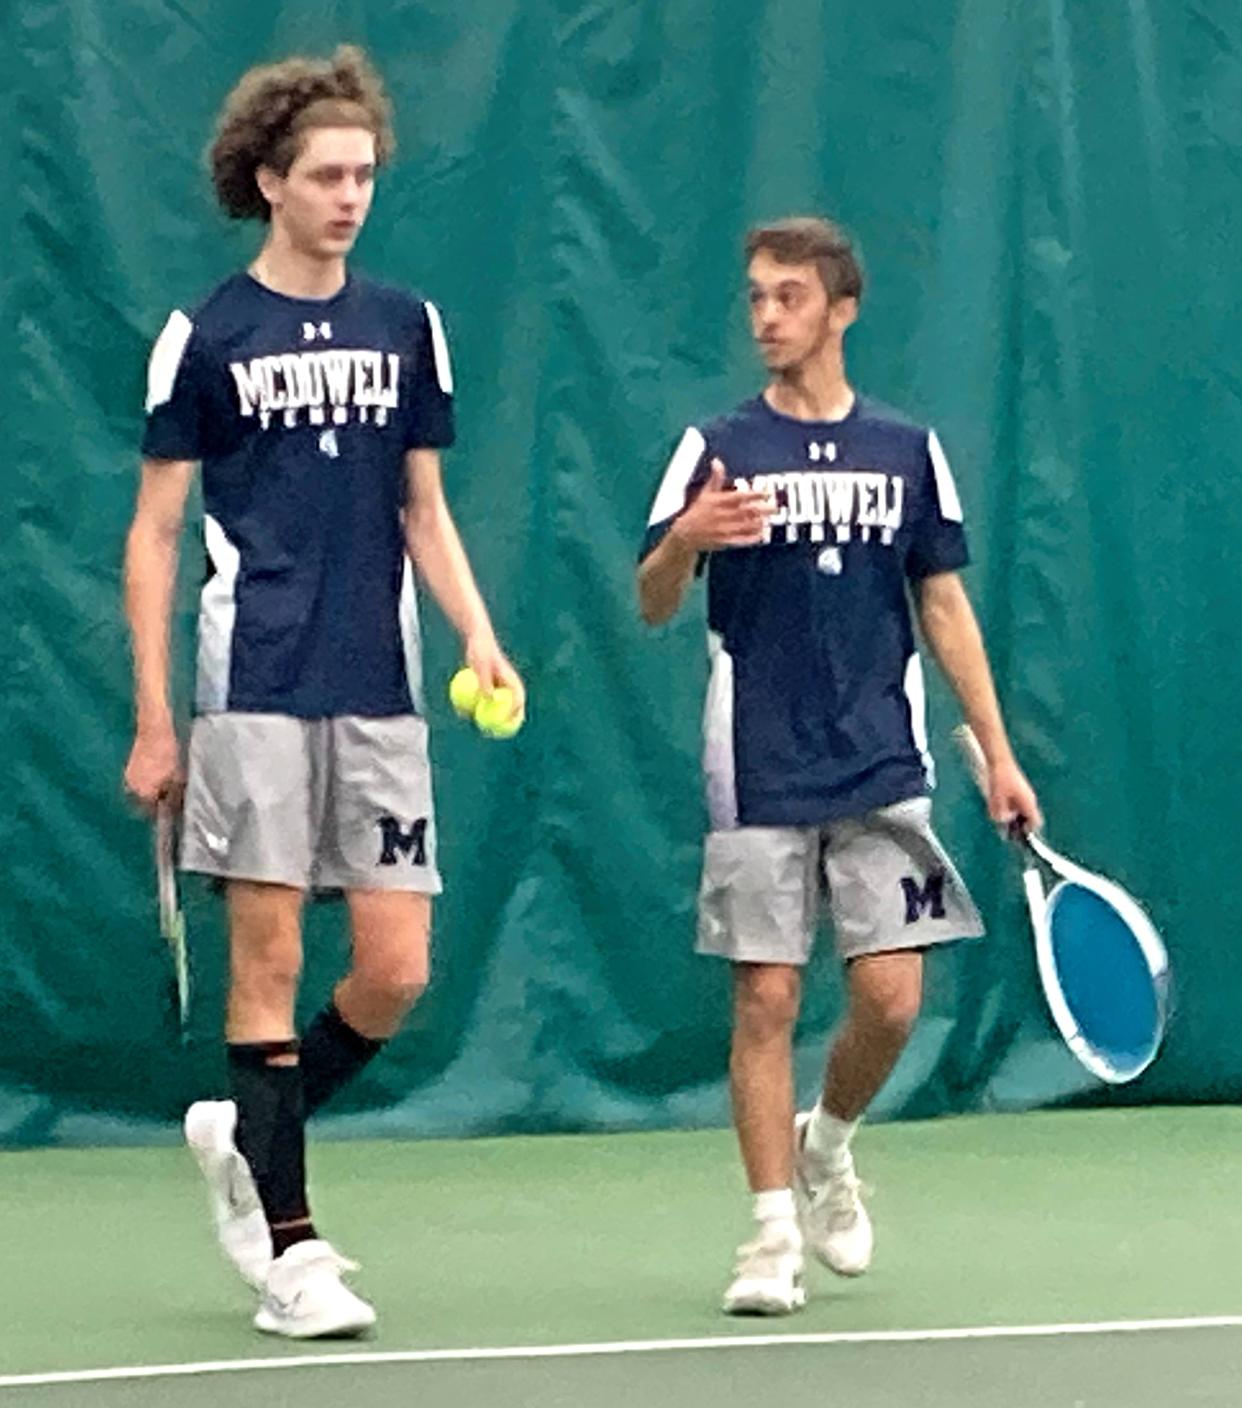 McDowell's Noah Hardesty and Gridley Wright discuss strategy during a changeover amid Wednesday's final for District 10's Class 3A boys doubles tennis tournament at Westwood Racquet Club. Hardesty and Wright beat Trojan teammates Christian Neubert and Dan Idzik 6-1, 6-2.